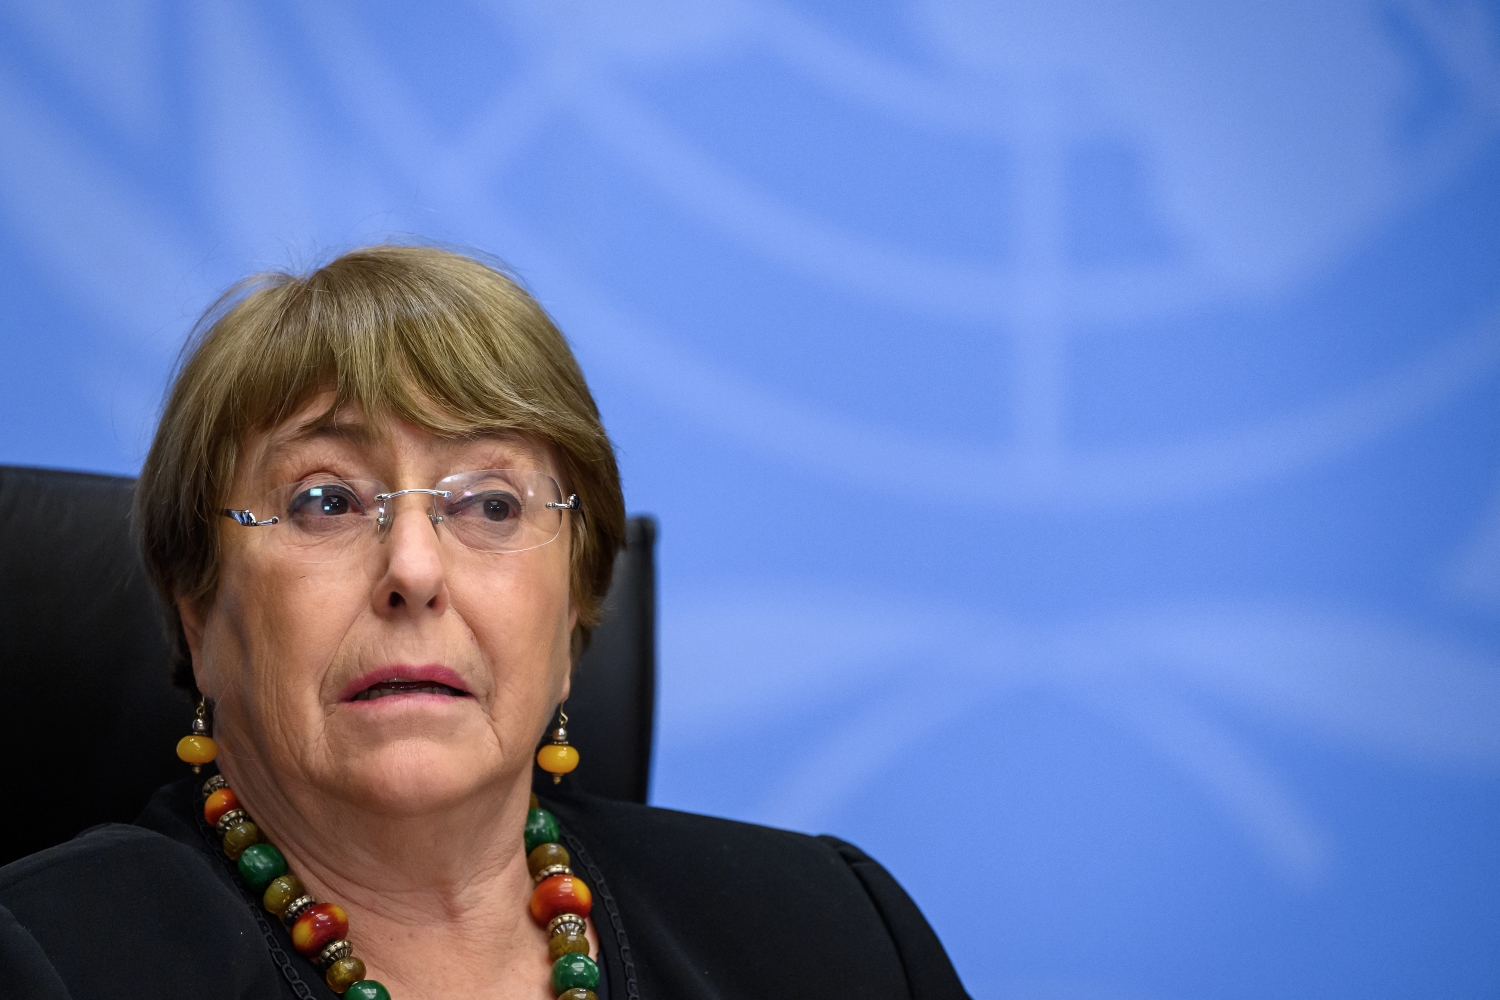 UN High Commissioner for Human Rights Michelle Bachelet looks on as she attends a press conference in Geneva. (AFP)